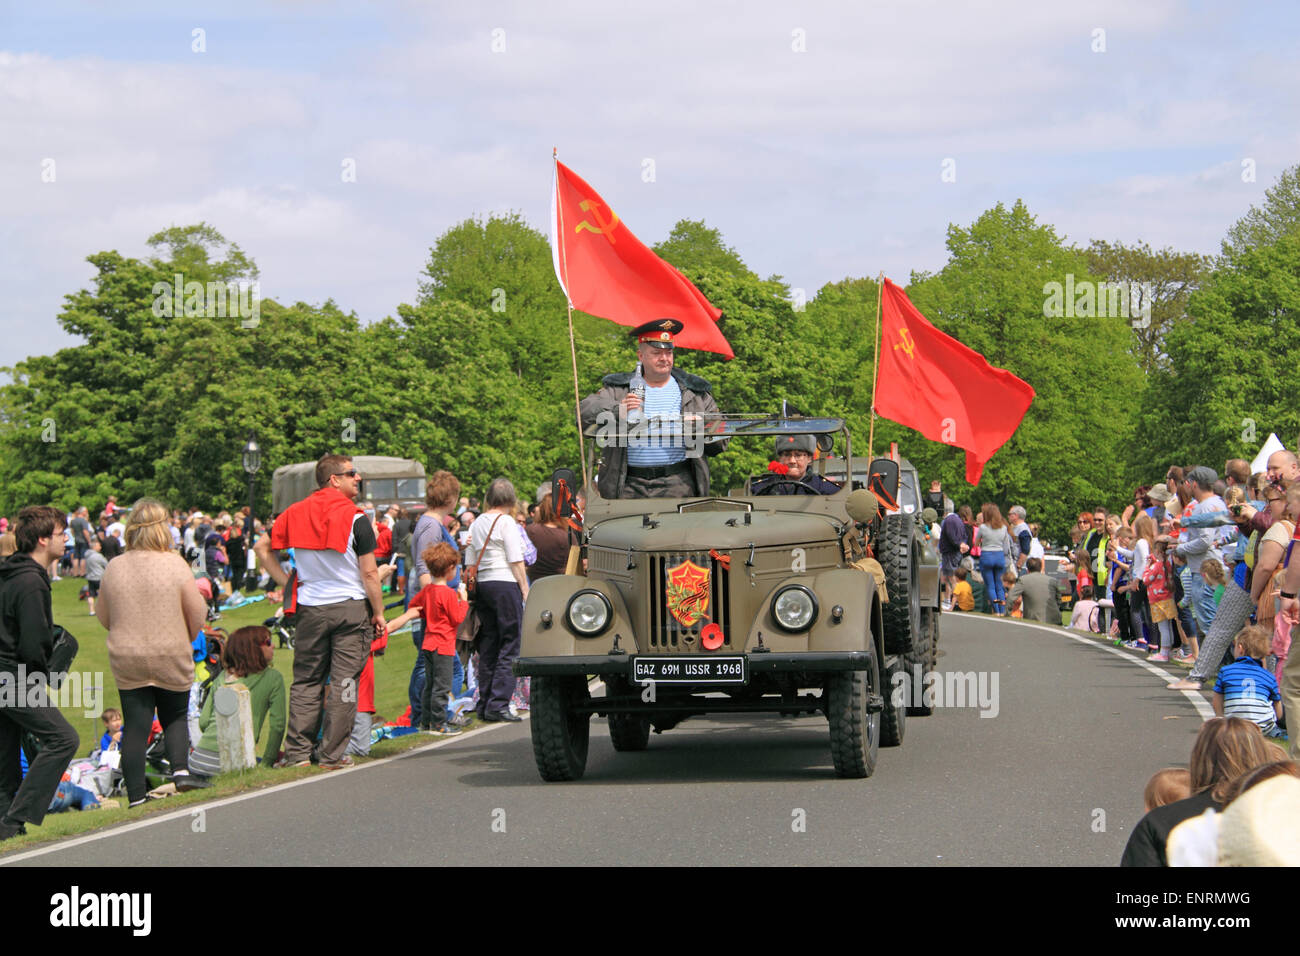 Russian GAZ-69 light truck (1968), Chestnut Sunday, 10th May 2015. Bushy Park, Hampton Court, London Borough of Richmond, England, Great Britain, United Kingdom, UK, Europe. Vintage and classic vehicle parade and displays with fairground attractions and military reenactments. Credit:  Ian Bottle / Alamy Live News Stock Photo